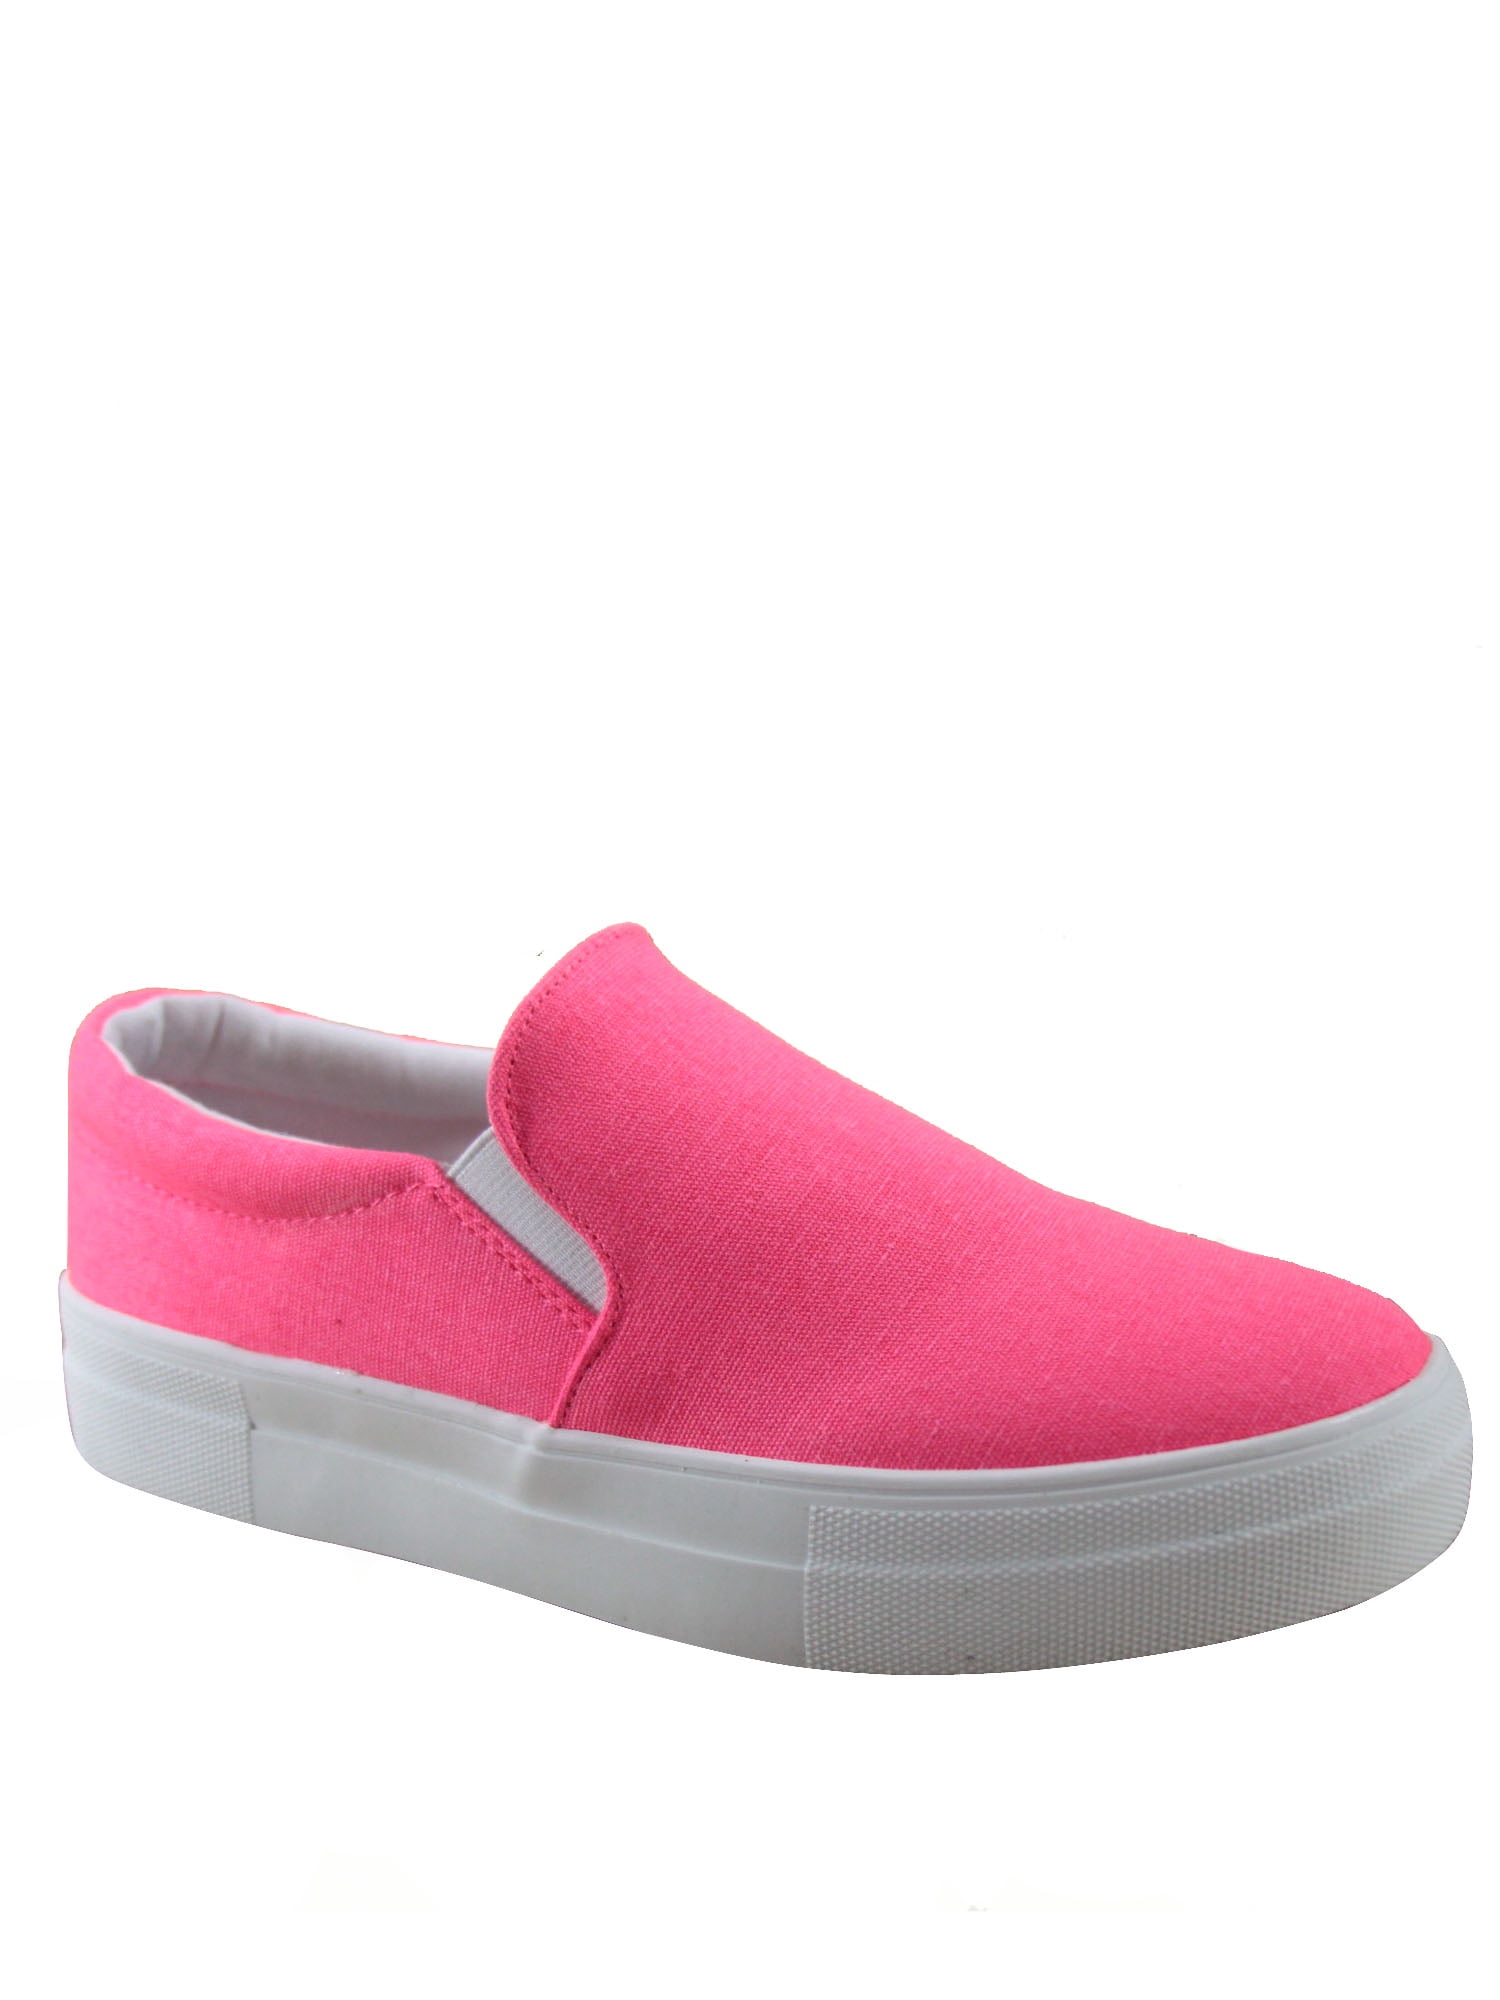 pink soda shoes